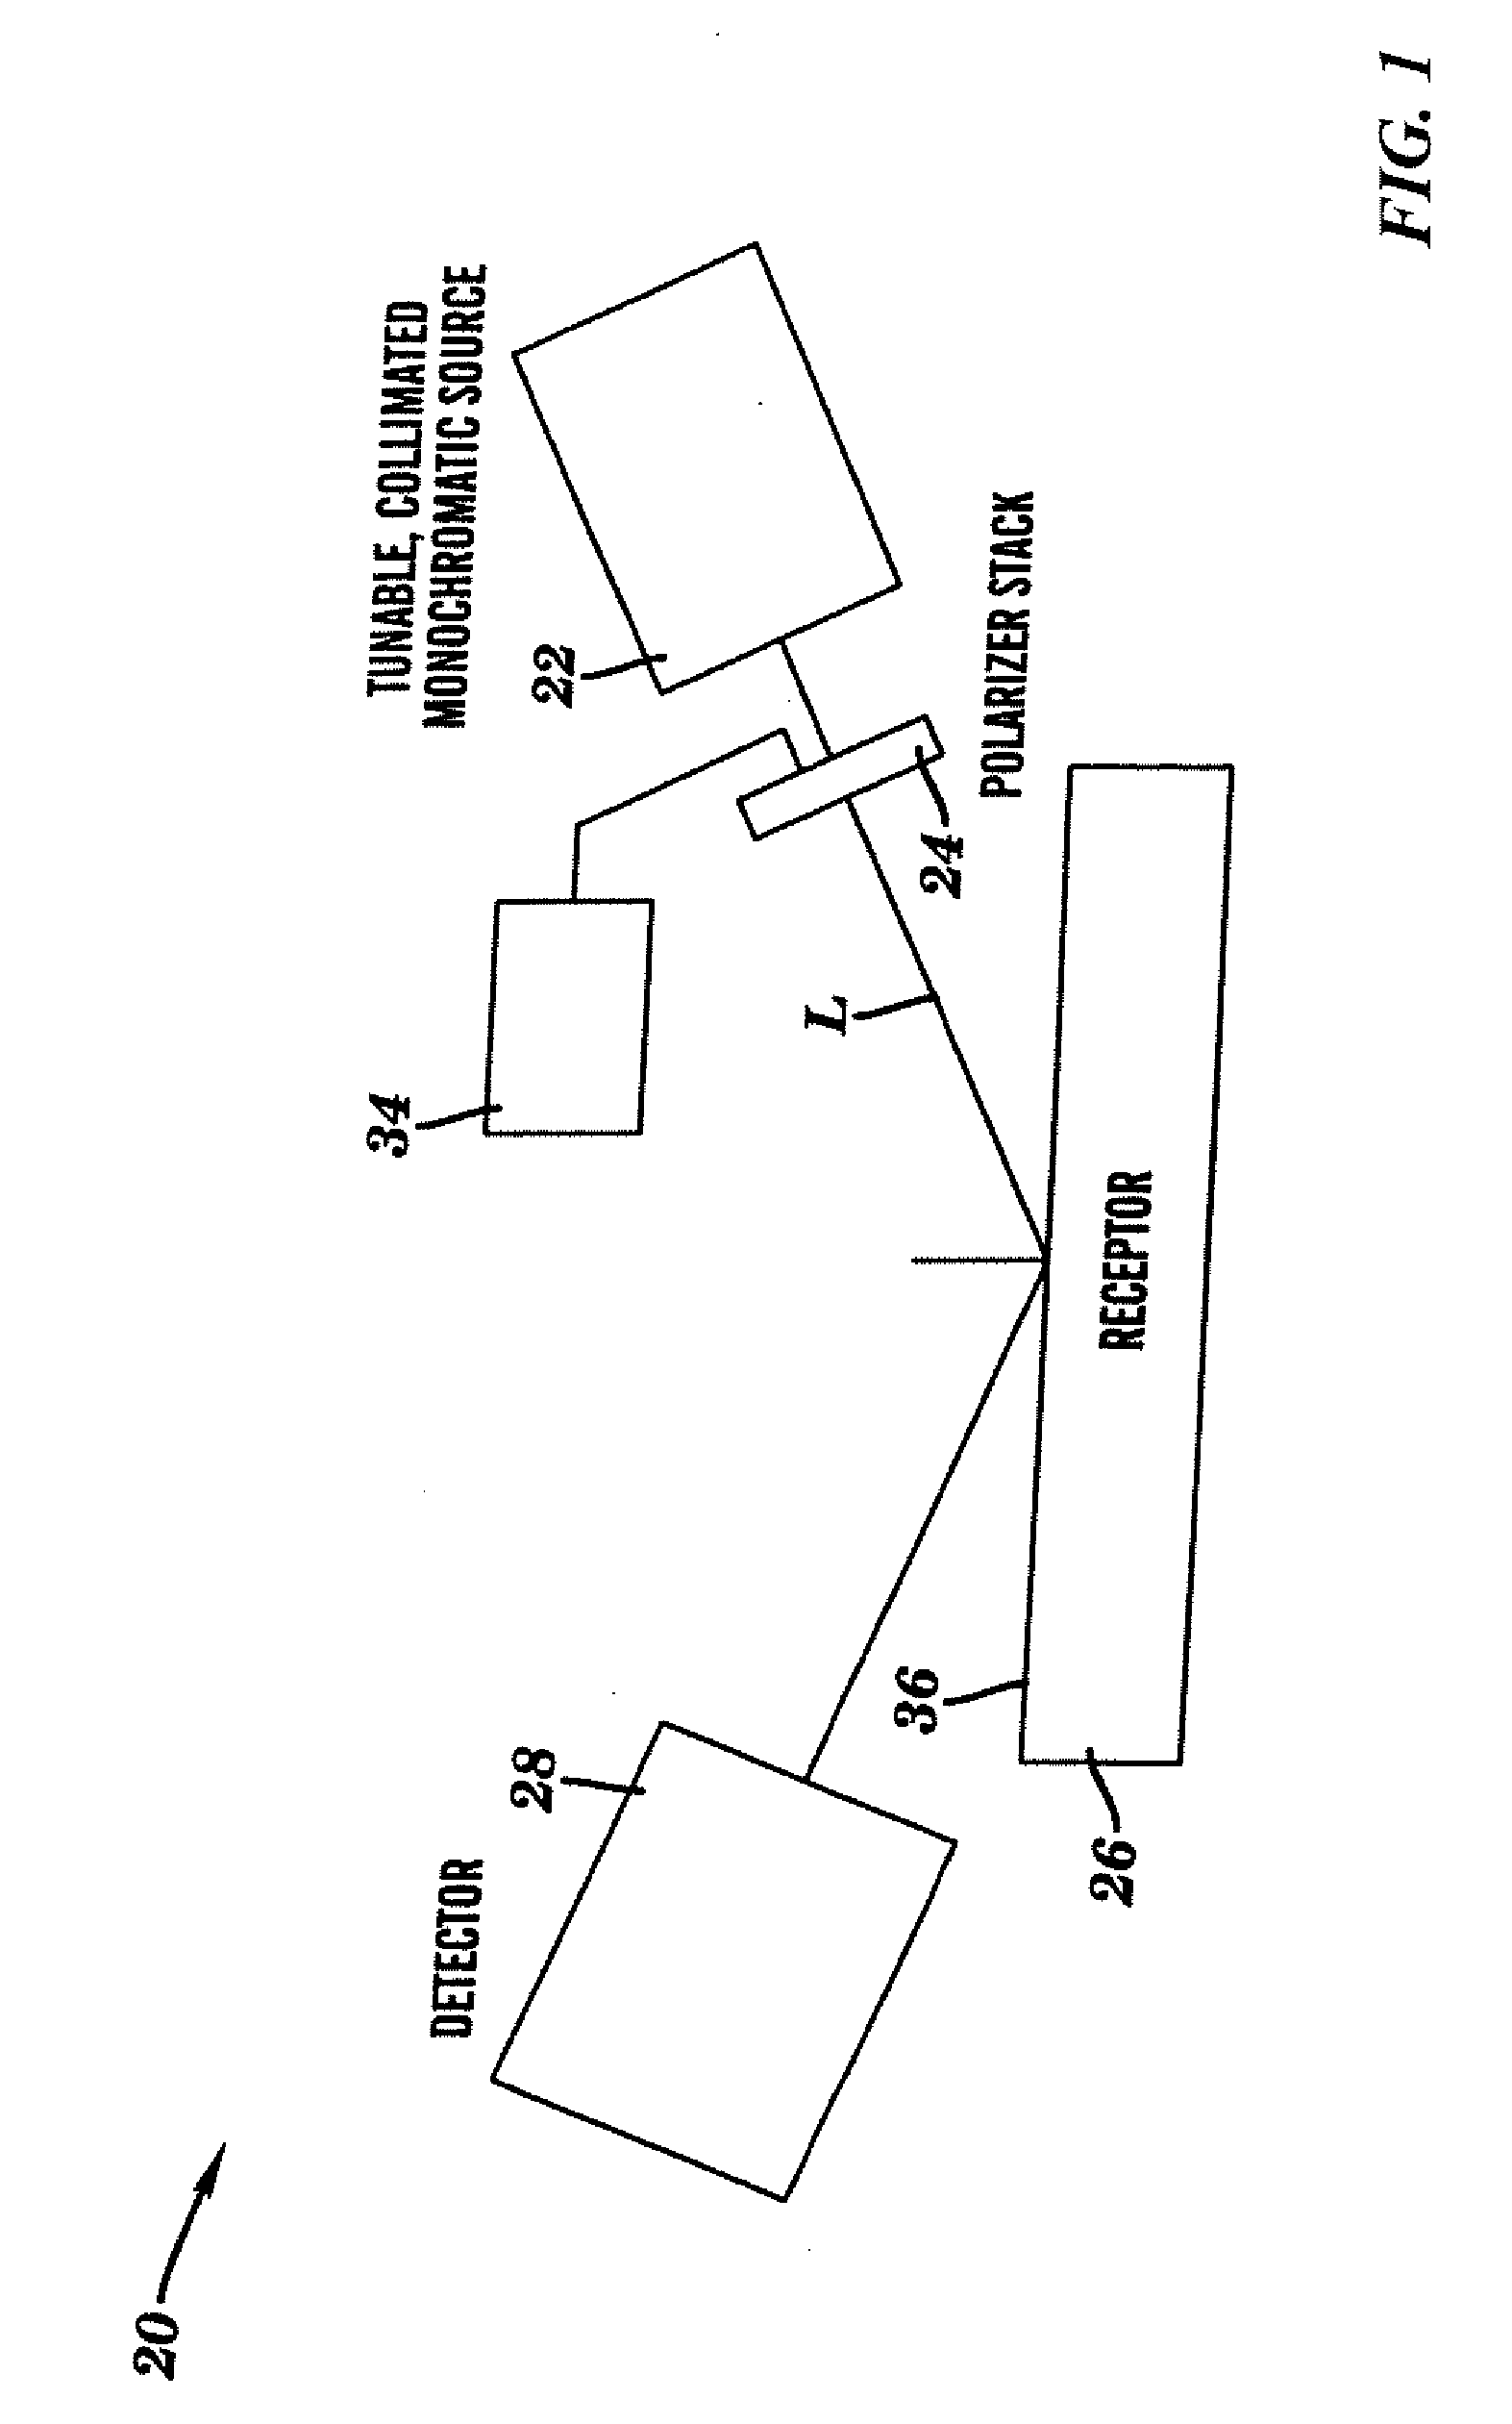 System and method for brewster angle straddle interferometry